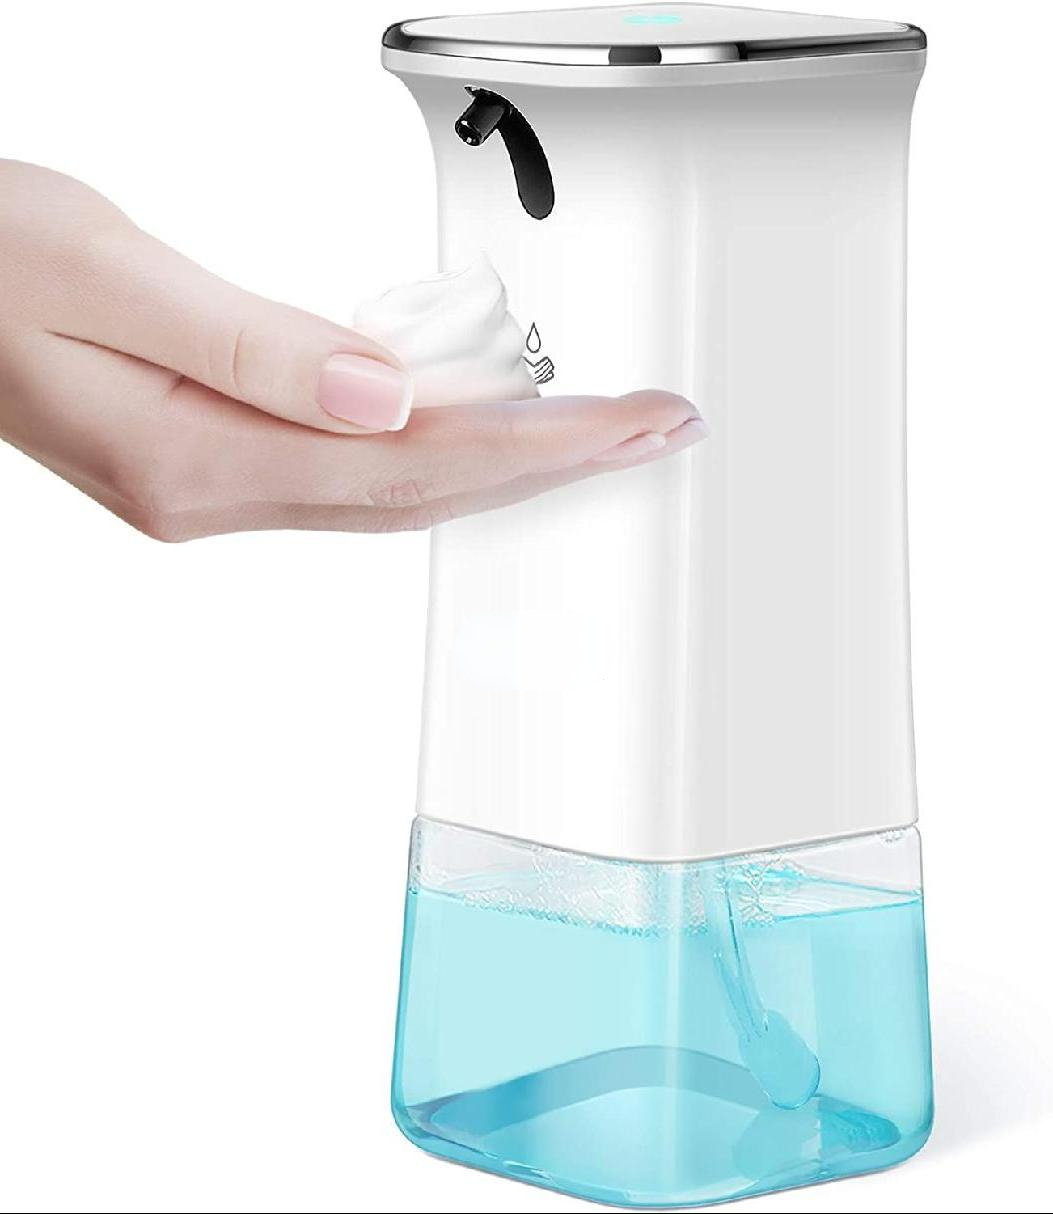 Frifoho Premium Automatic Foaming Soap Dispenser Adjustable Volume Control  | Fashionable Exquisite Battery Operated Electric Touchless Soap Dispensers  For Kitchen, Bathroom, Office, Hotel | Wayfair